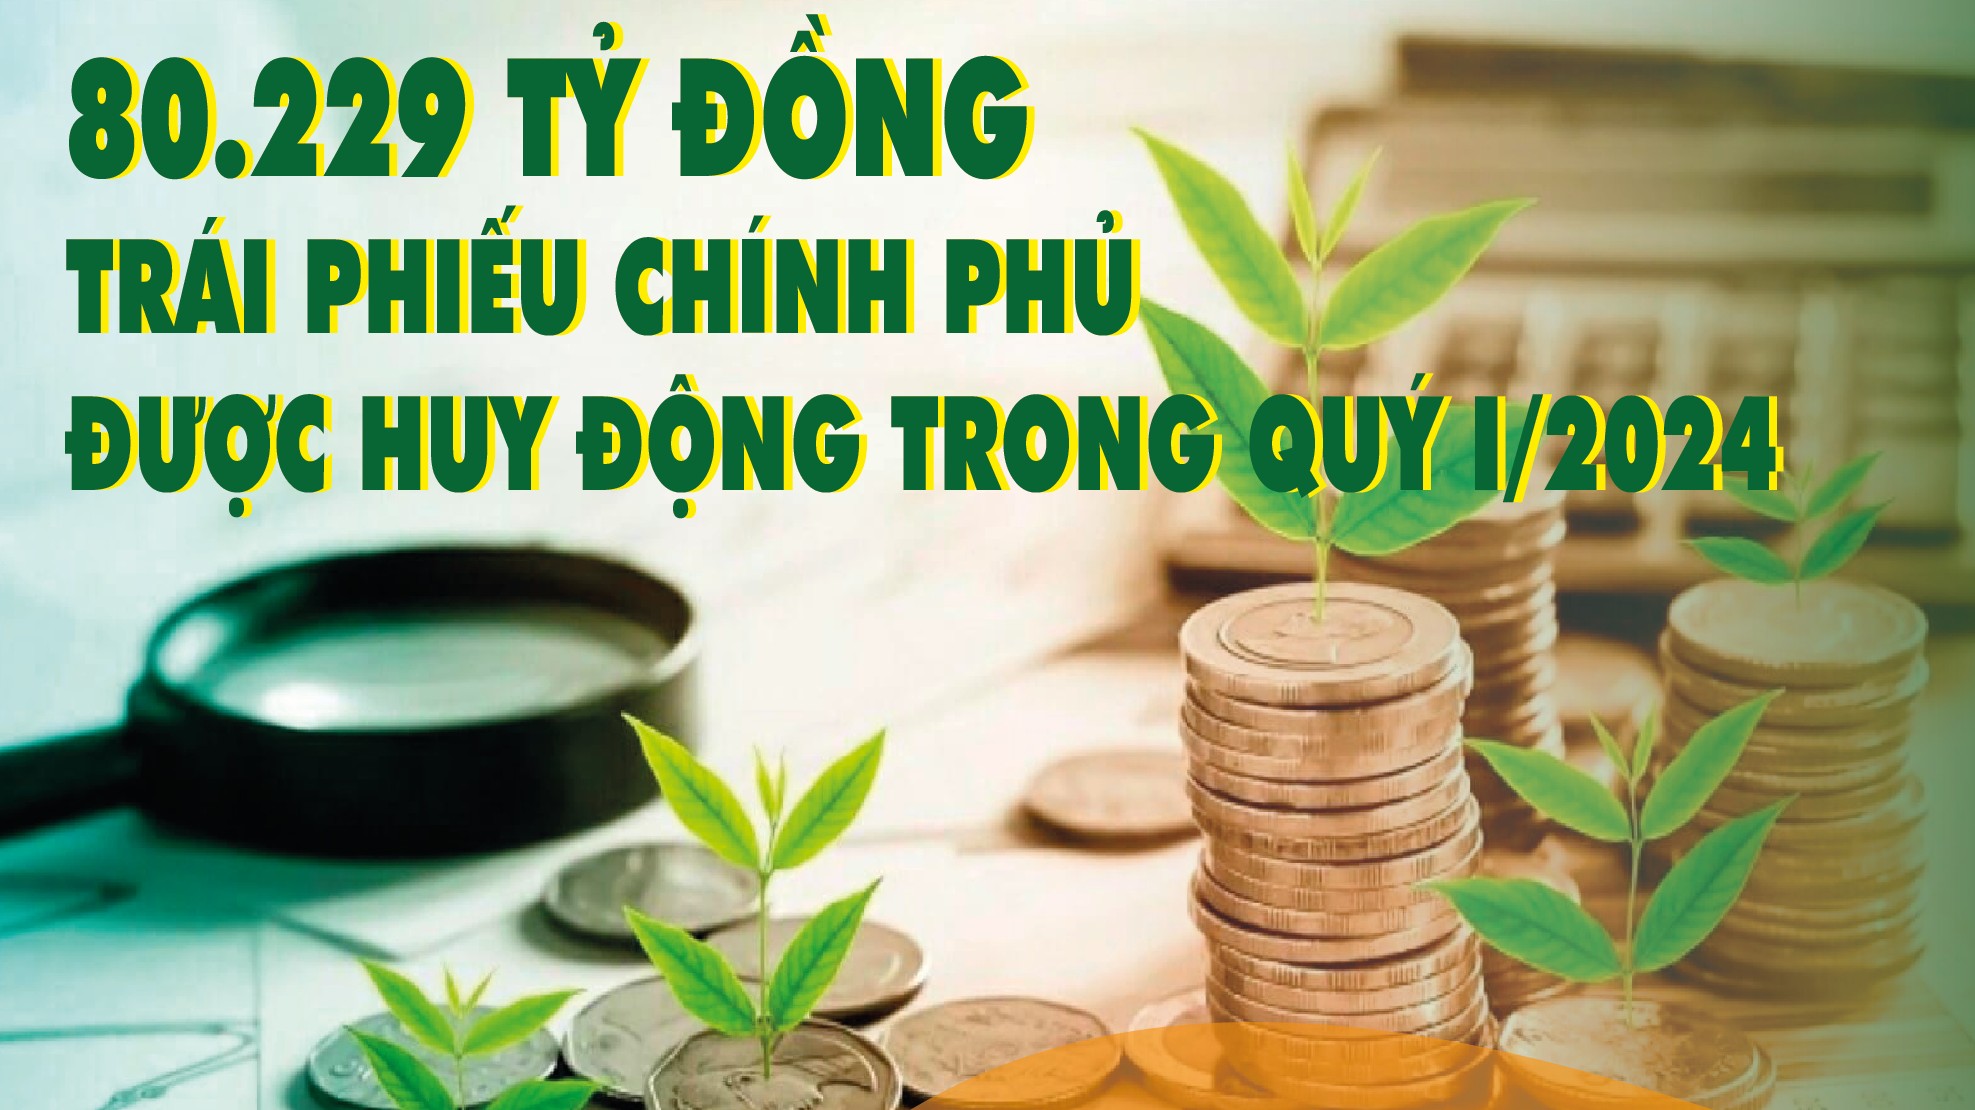 infographics 80229 ty dong trai phieu chinh phu duoc huy dong trong quy i2024